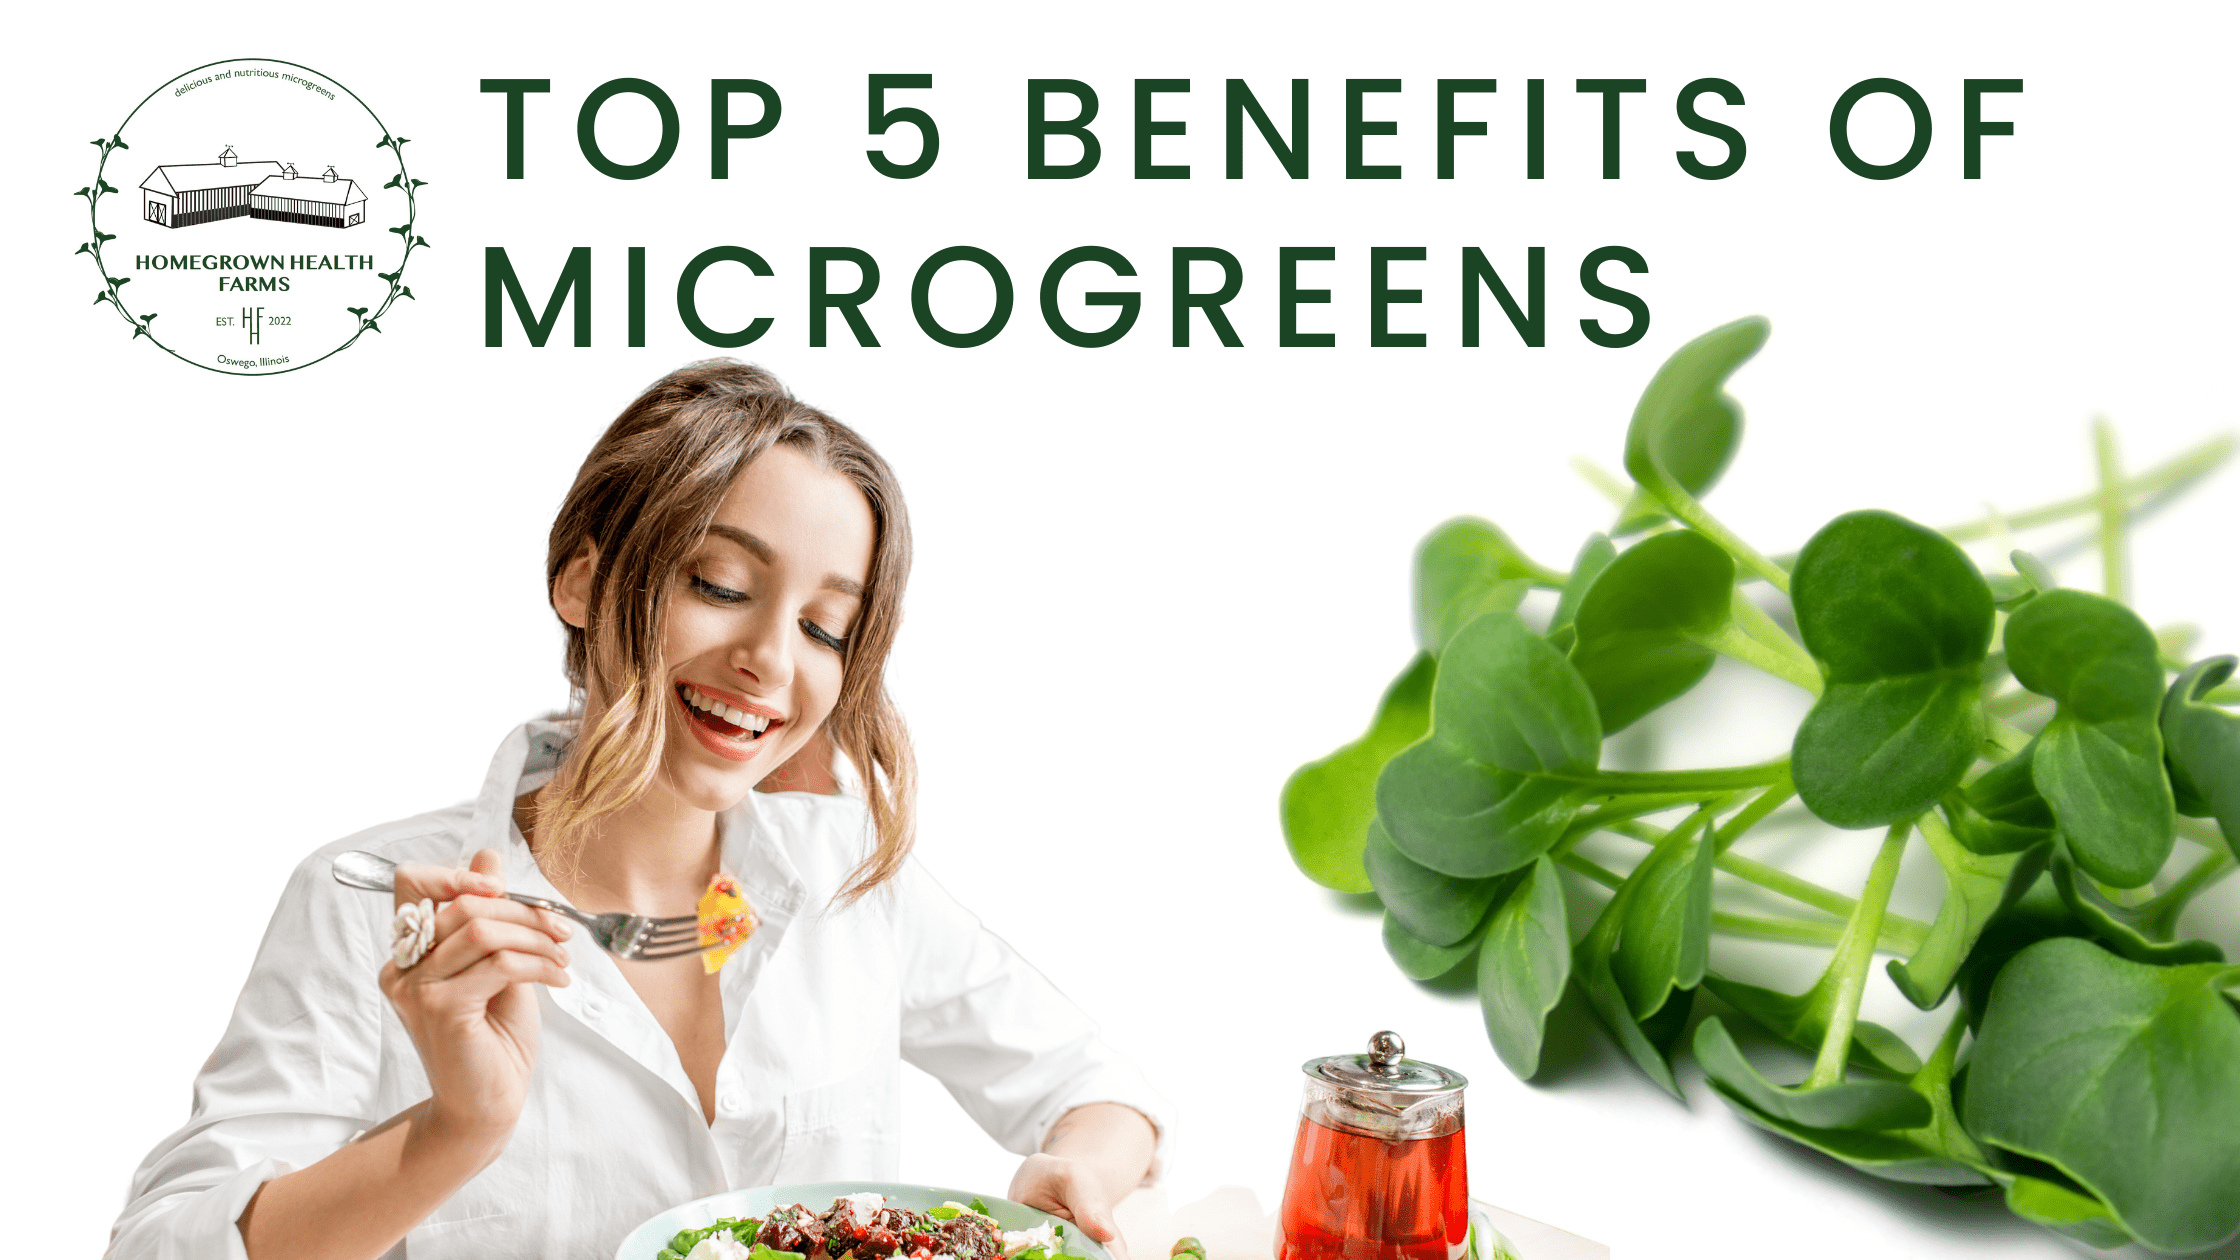 Here are the Top 5 Benefits of Microgreens